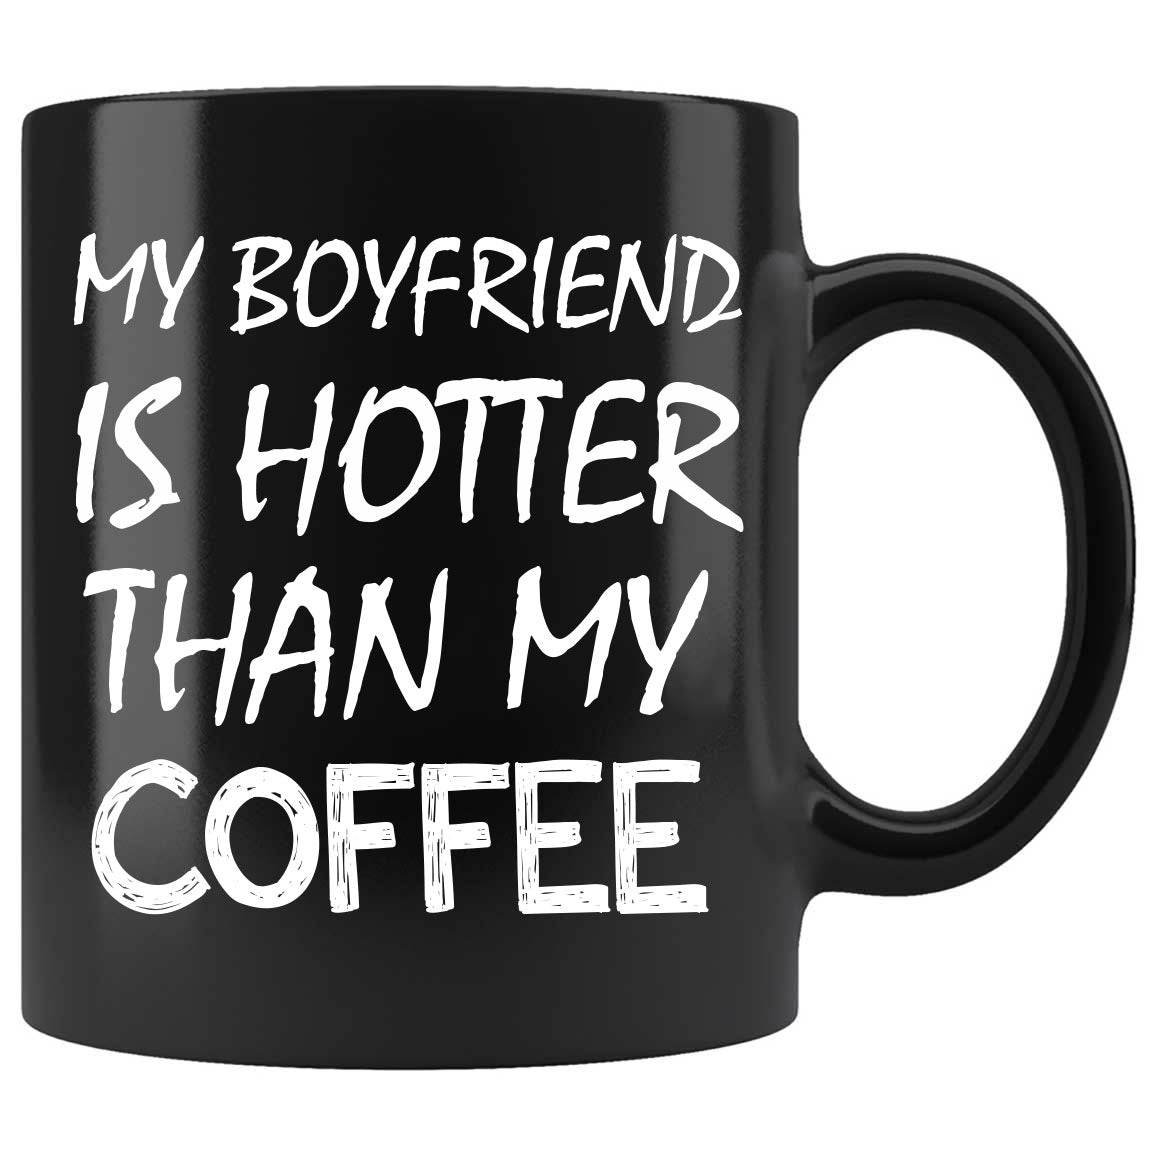 Skitongifts Funny Ceramic Coffee Mug For Birthday, Mother's Day, Father's Day, Christmas PN151221_My Boyfriend Is Hotter Than My Coffee